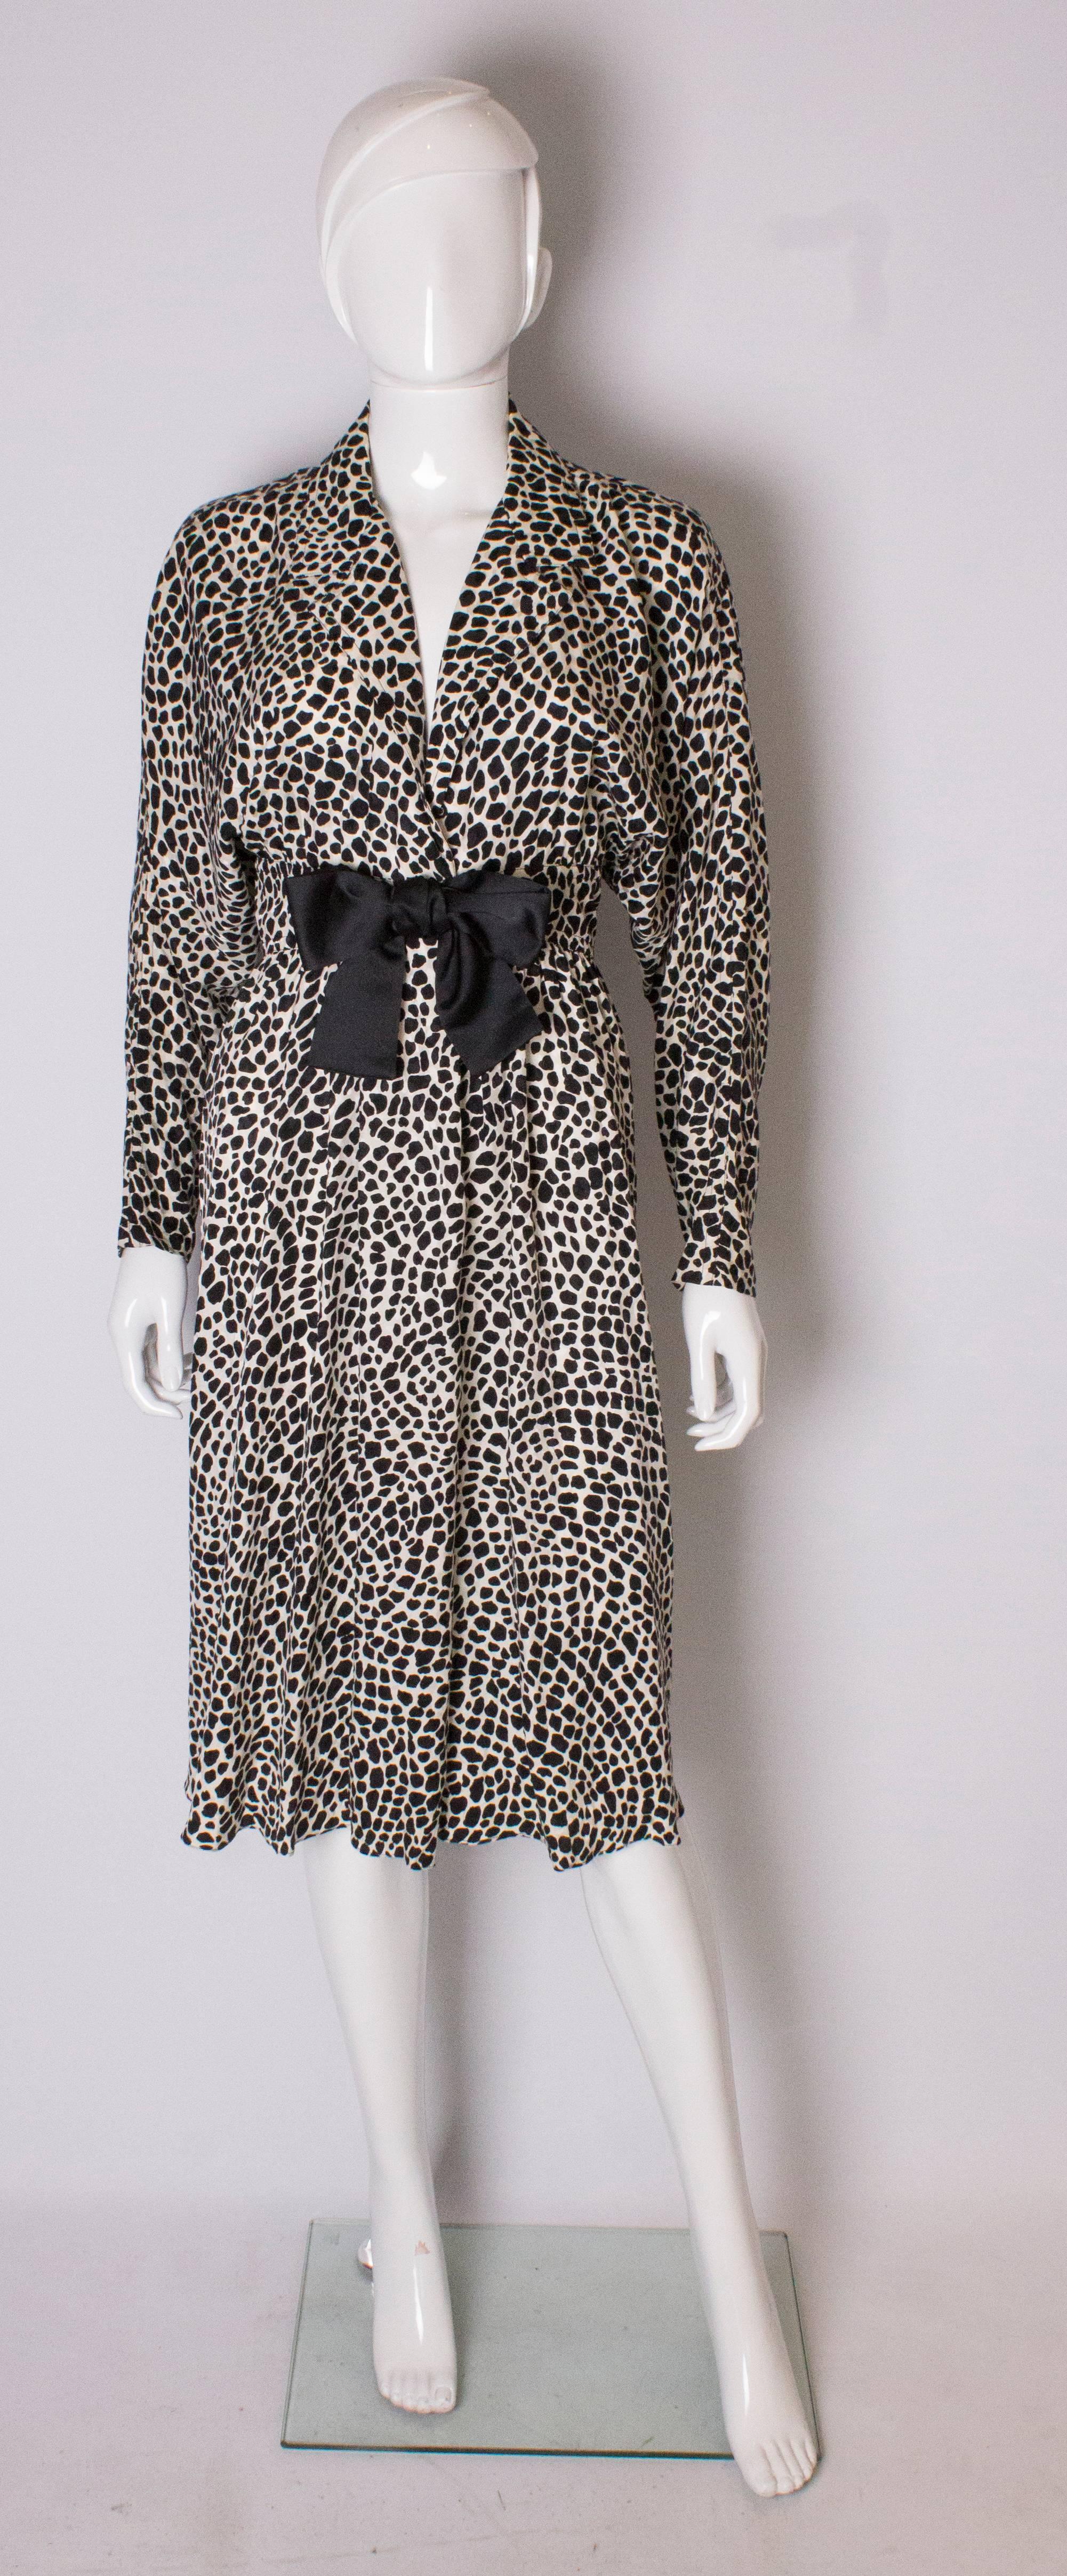 A chic black and white dress by American designer, Adele Simpson. The dress is in a wonderful black and white print fabric, and  has a v neckline, with wide collar and bow detail at waist leval.It has front popper opening below waist leval.